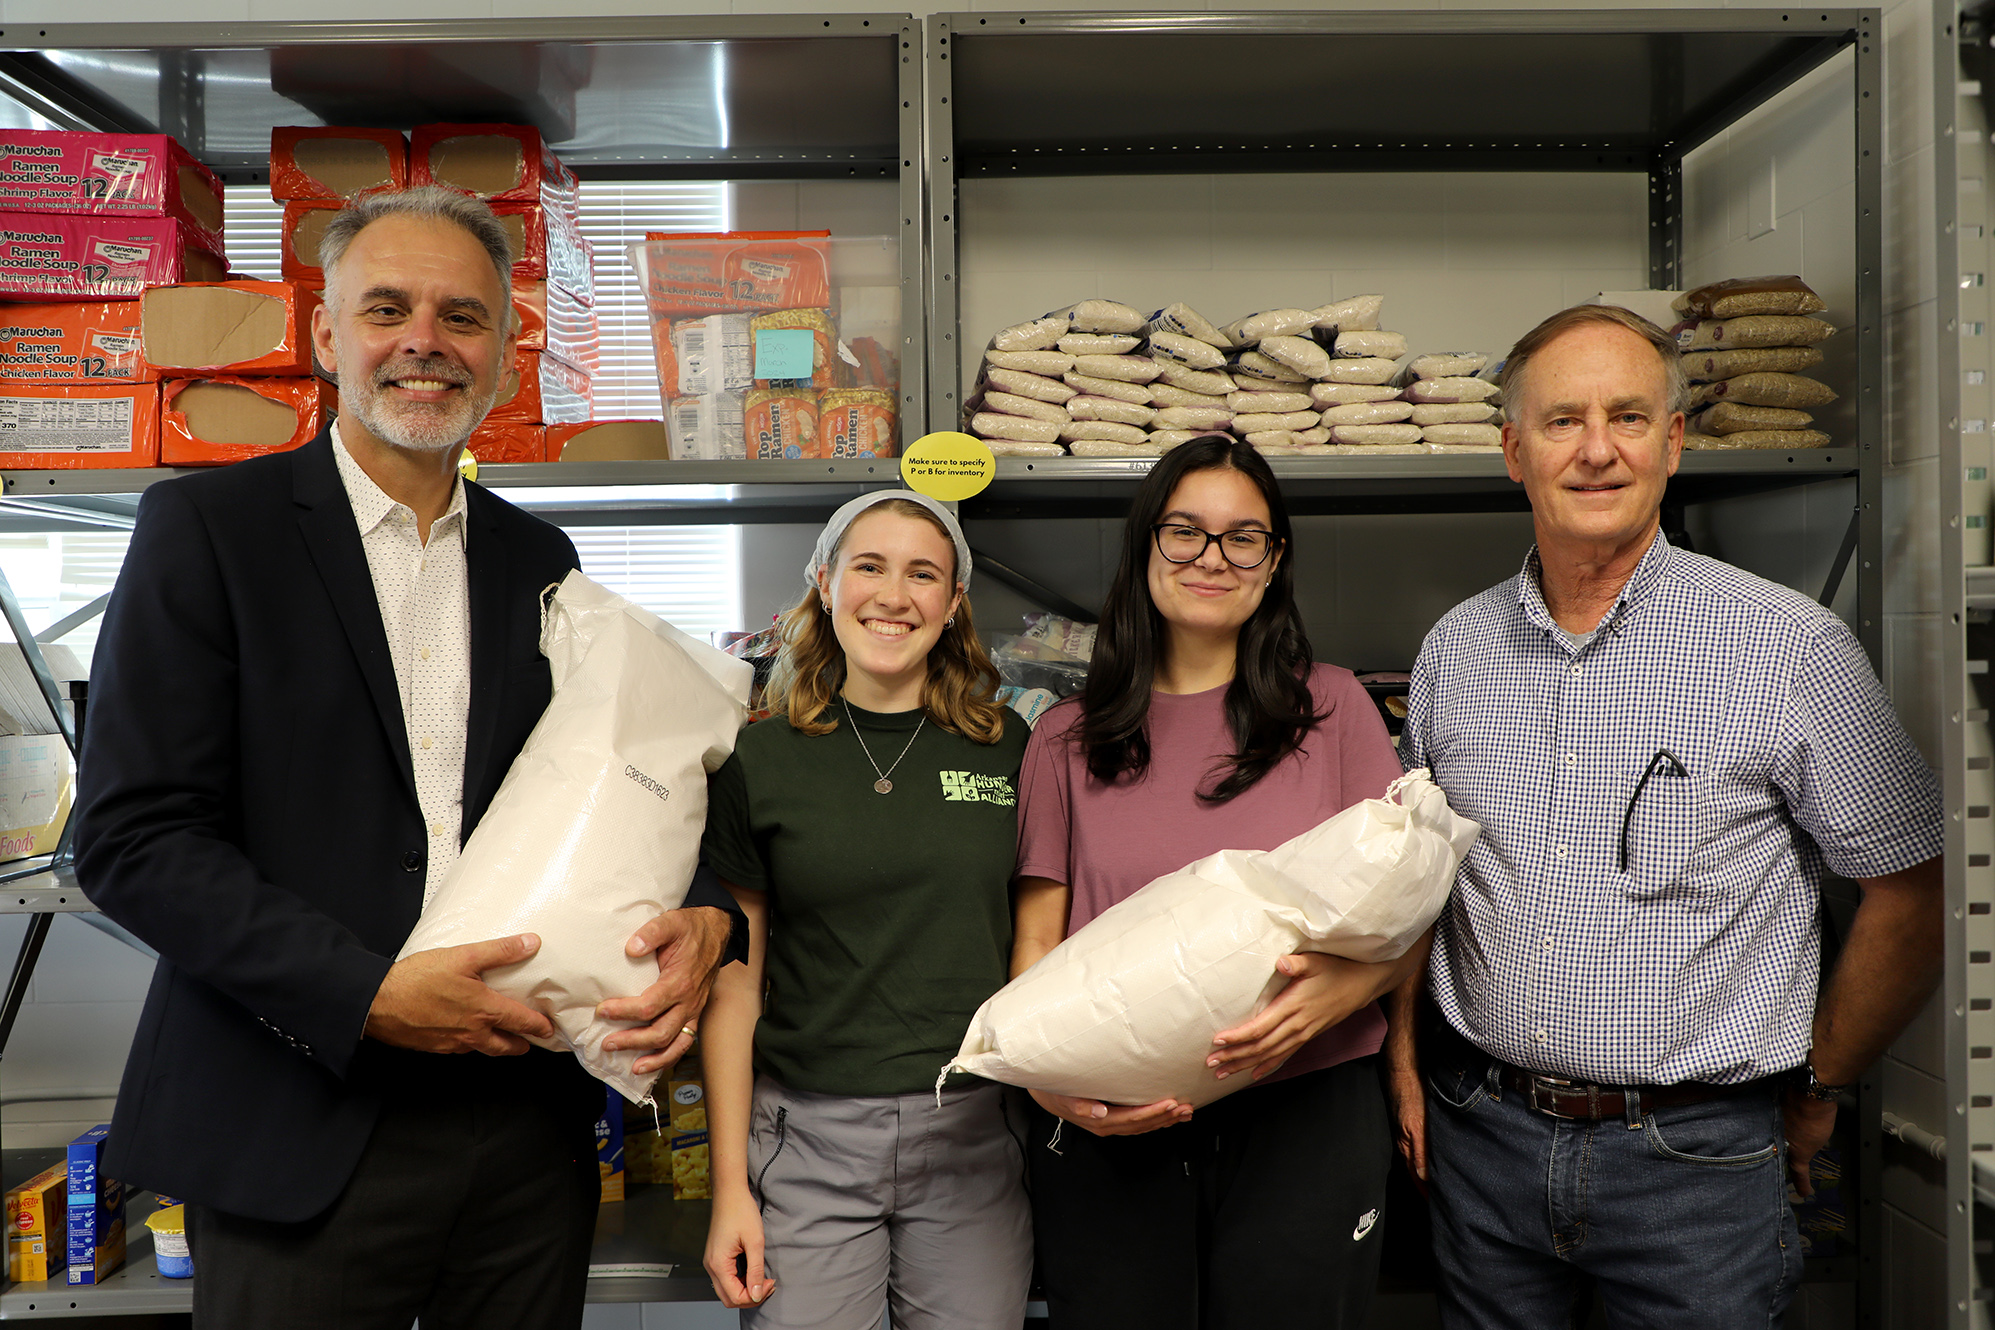 Arkansas Agricultural Experiment Station Director Jean-Francois Meullenet, left, and Assistant Director Nathan McKinney, right, joined student volunteers Katelyn Helberg and Caroline Wilson for the intake of rice donations to the Jane B. Gearhart Full Circle Food Pantry at the University of Arkansas. (Photo by Karli Yarber, University of Arkansas System.)